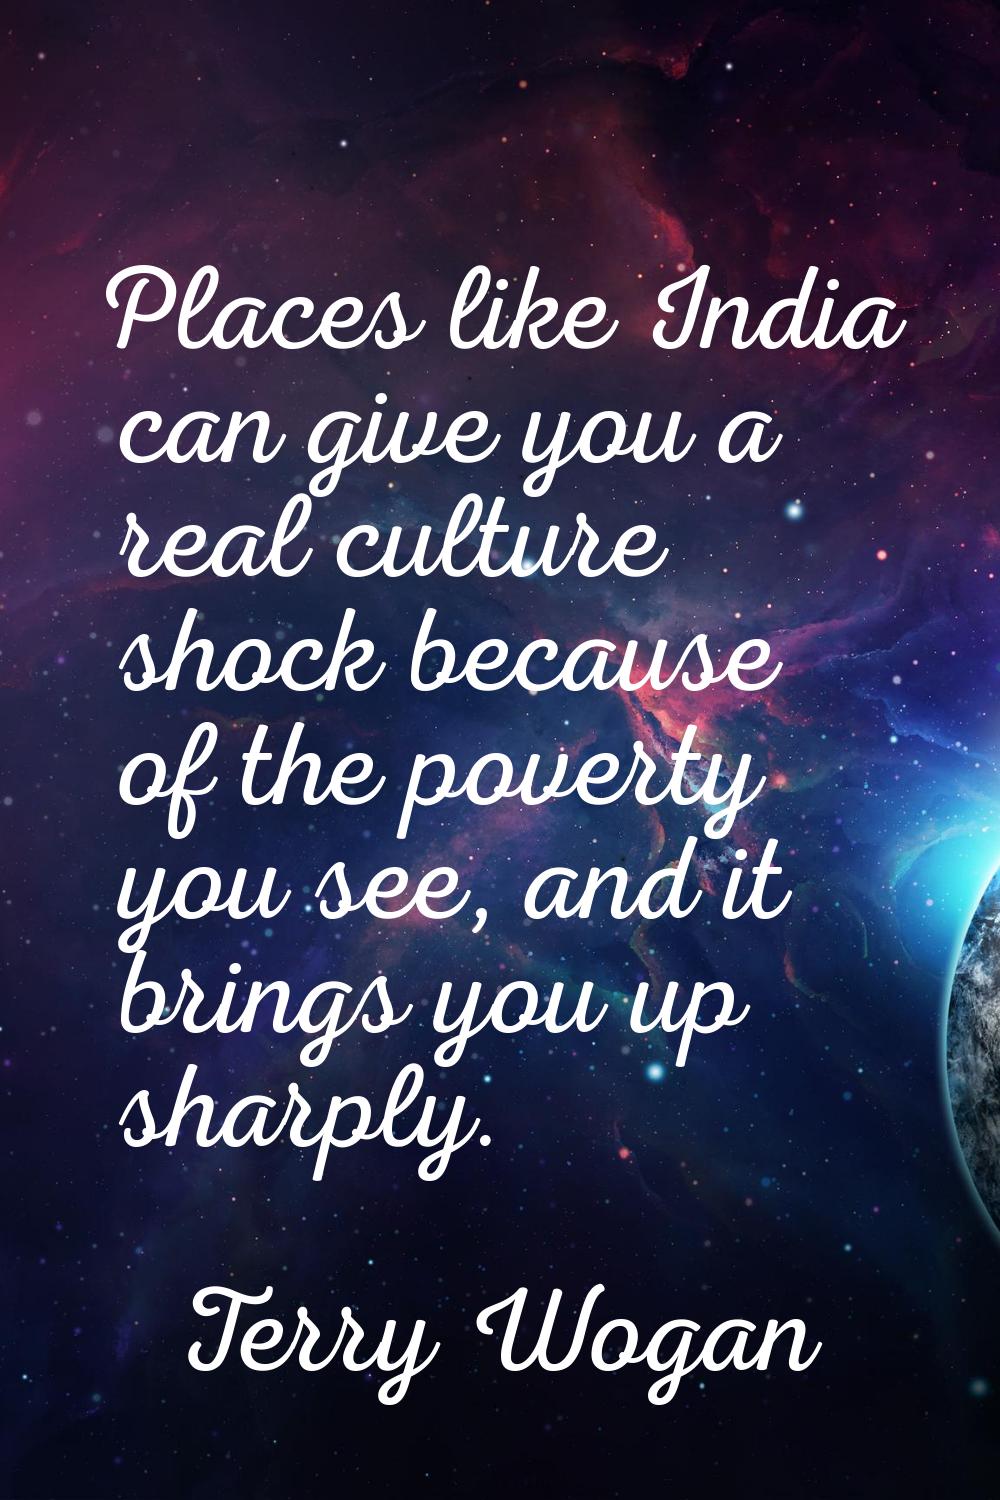 Places like India can give you a real culture shock because of the poverty you see, and it brings y